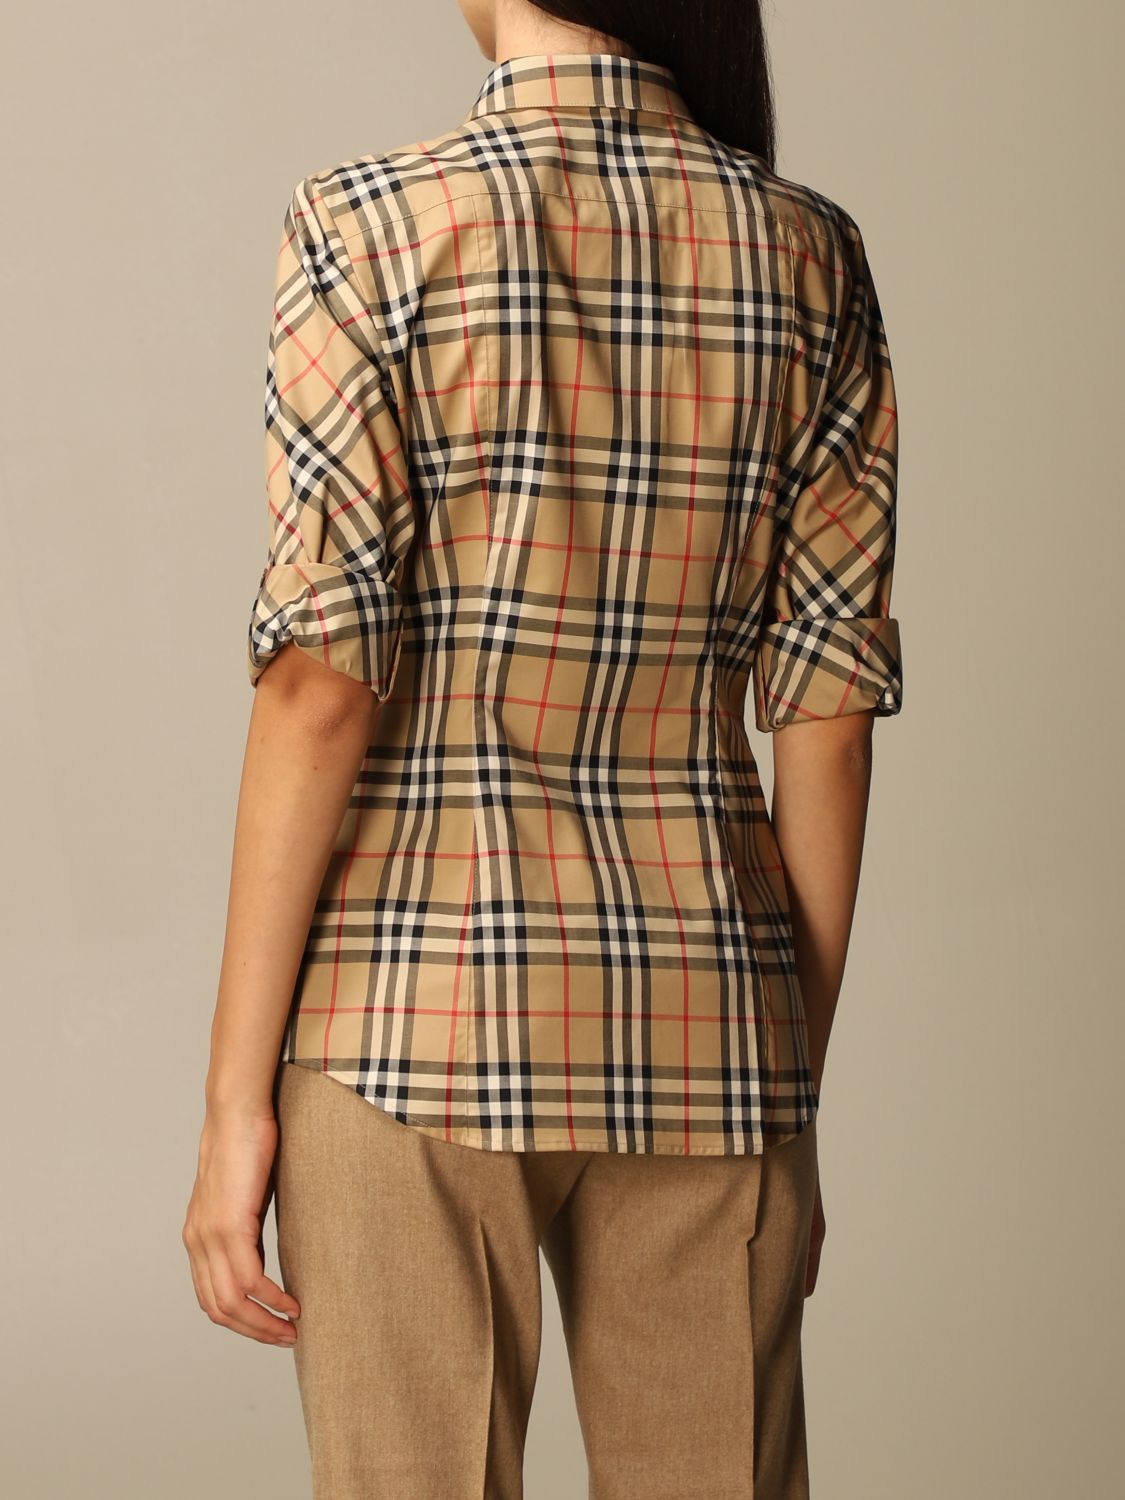 BURBERRY: Luka shirt in cotton twill with vintage check pattern | Shirt ...